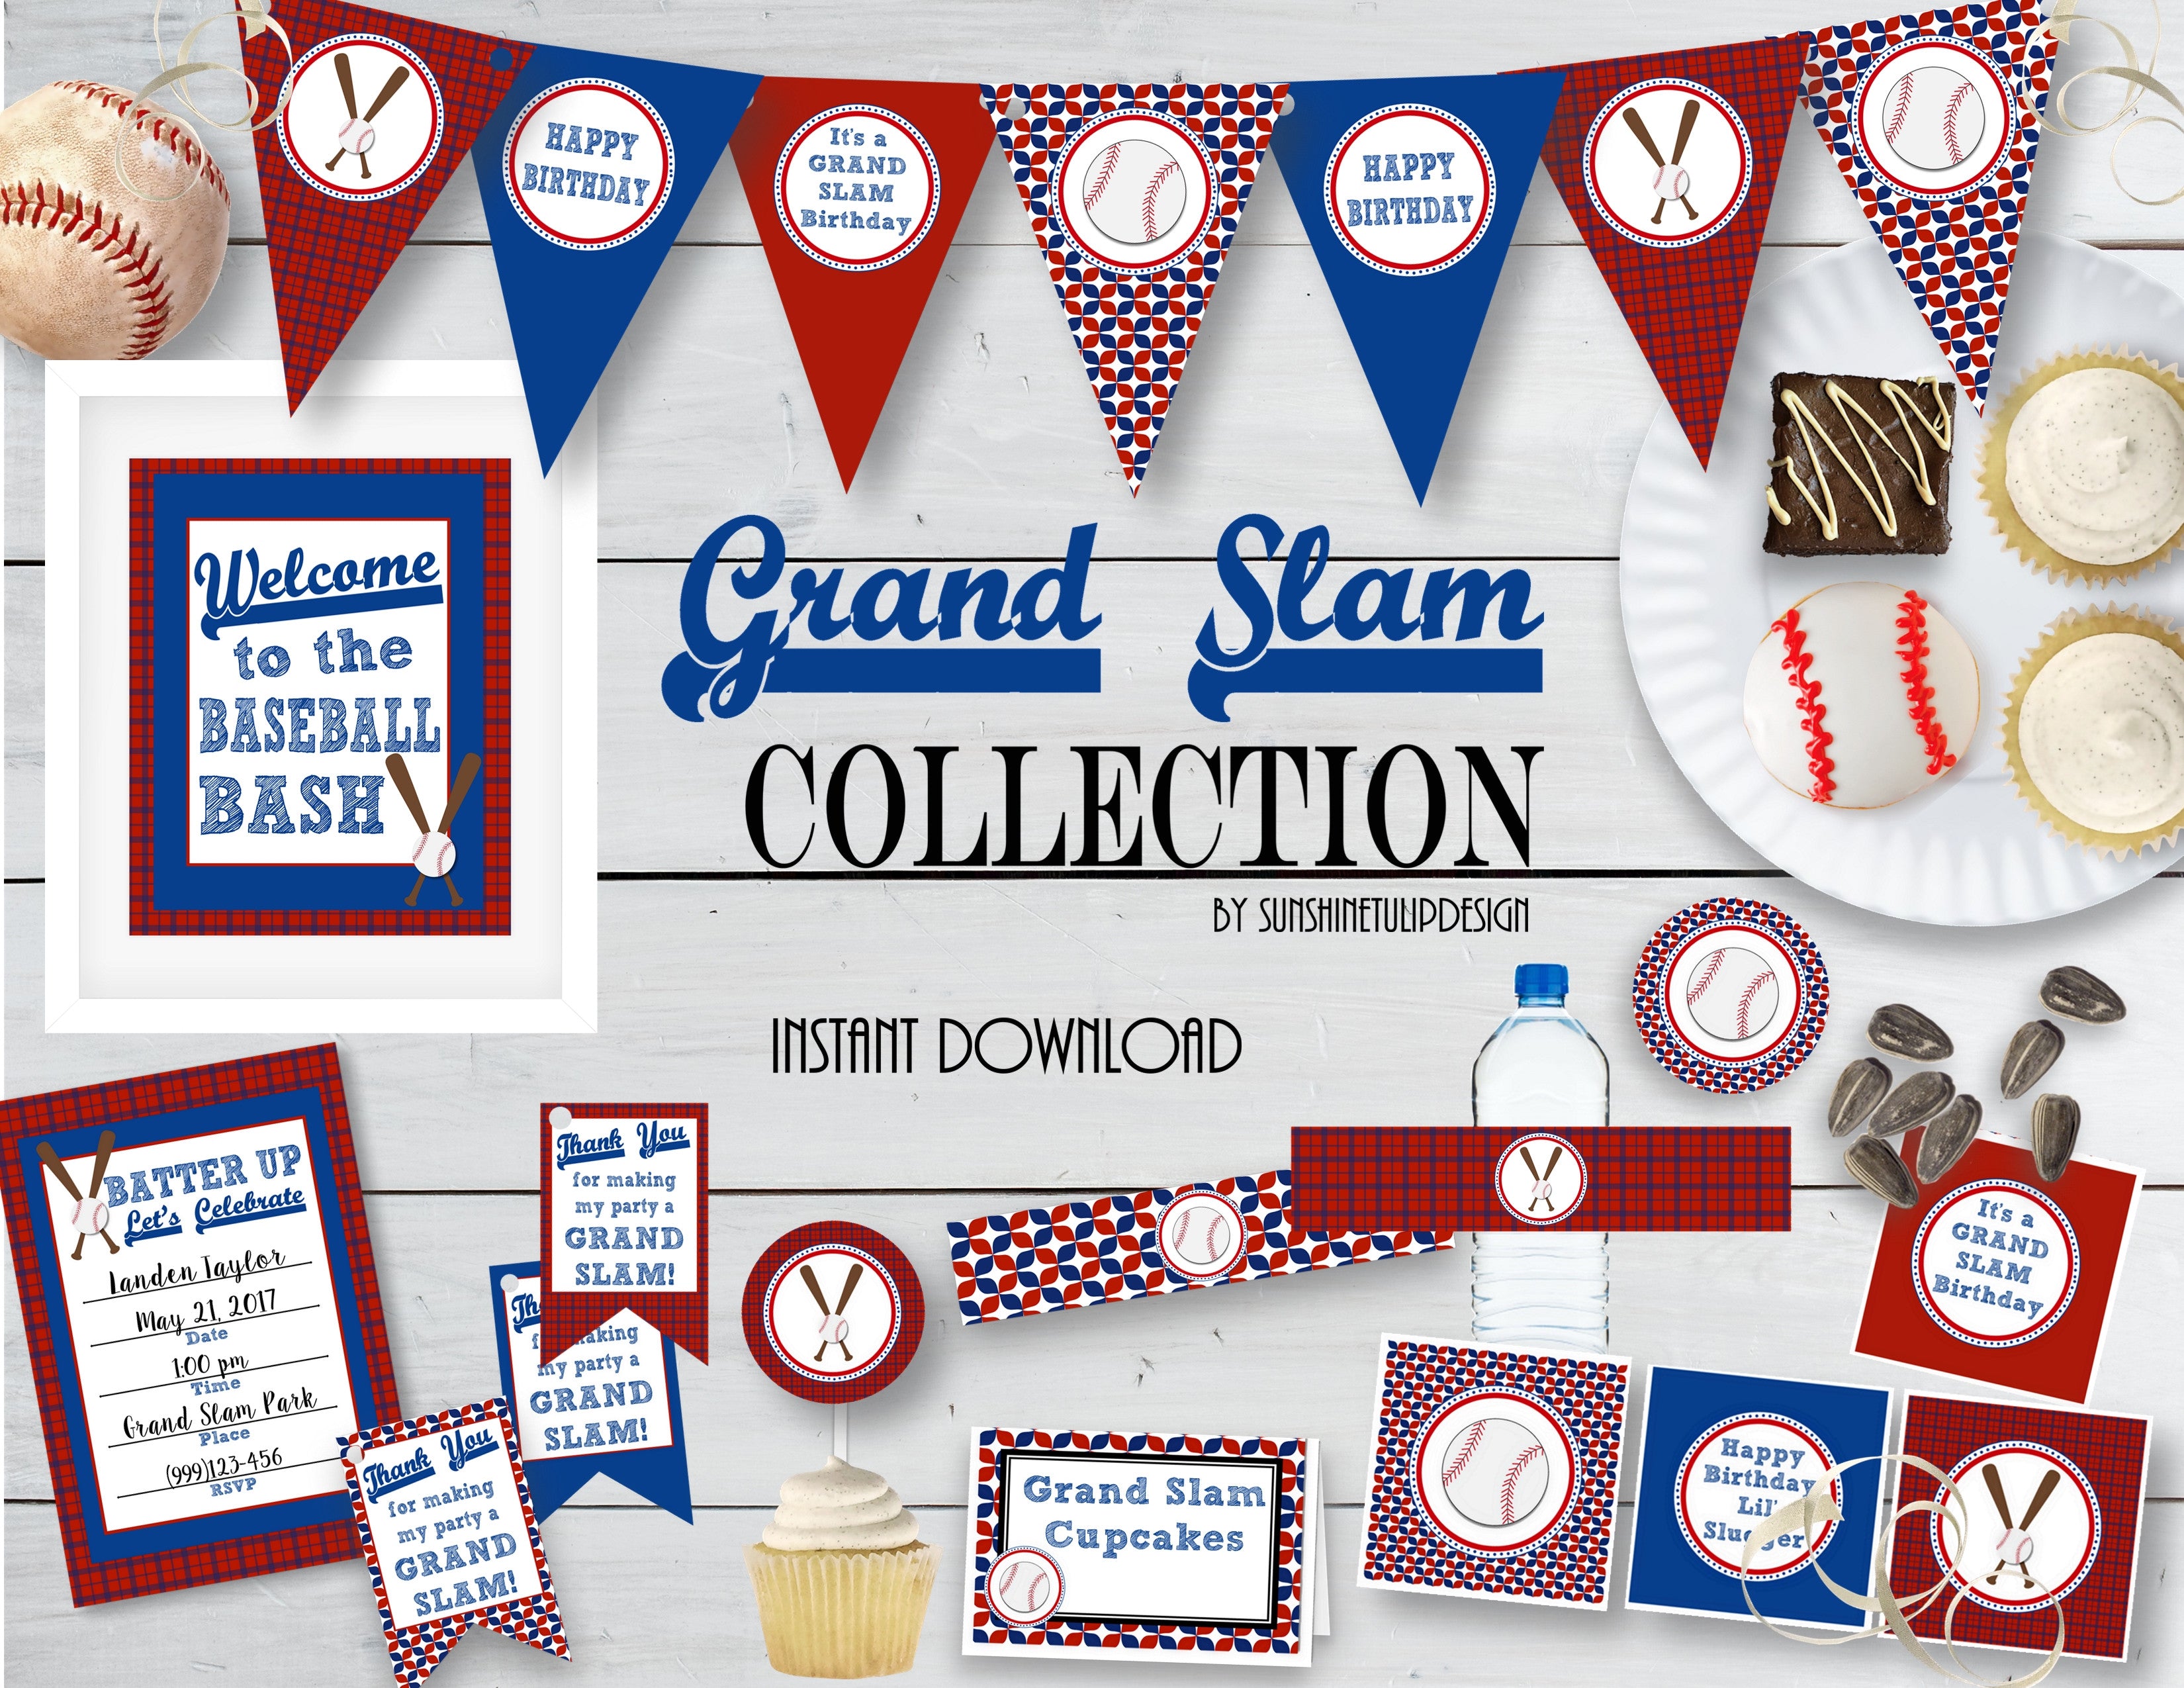 6-best-images-of-baseball-party-printables-free-free-baseball-printables-birthday-party-free